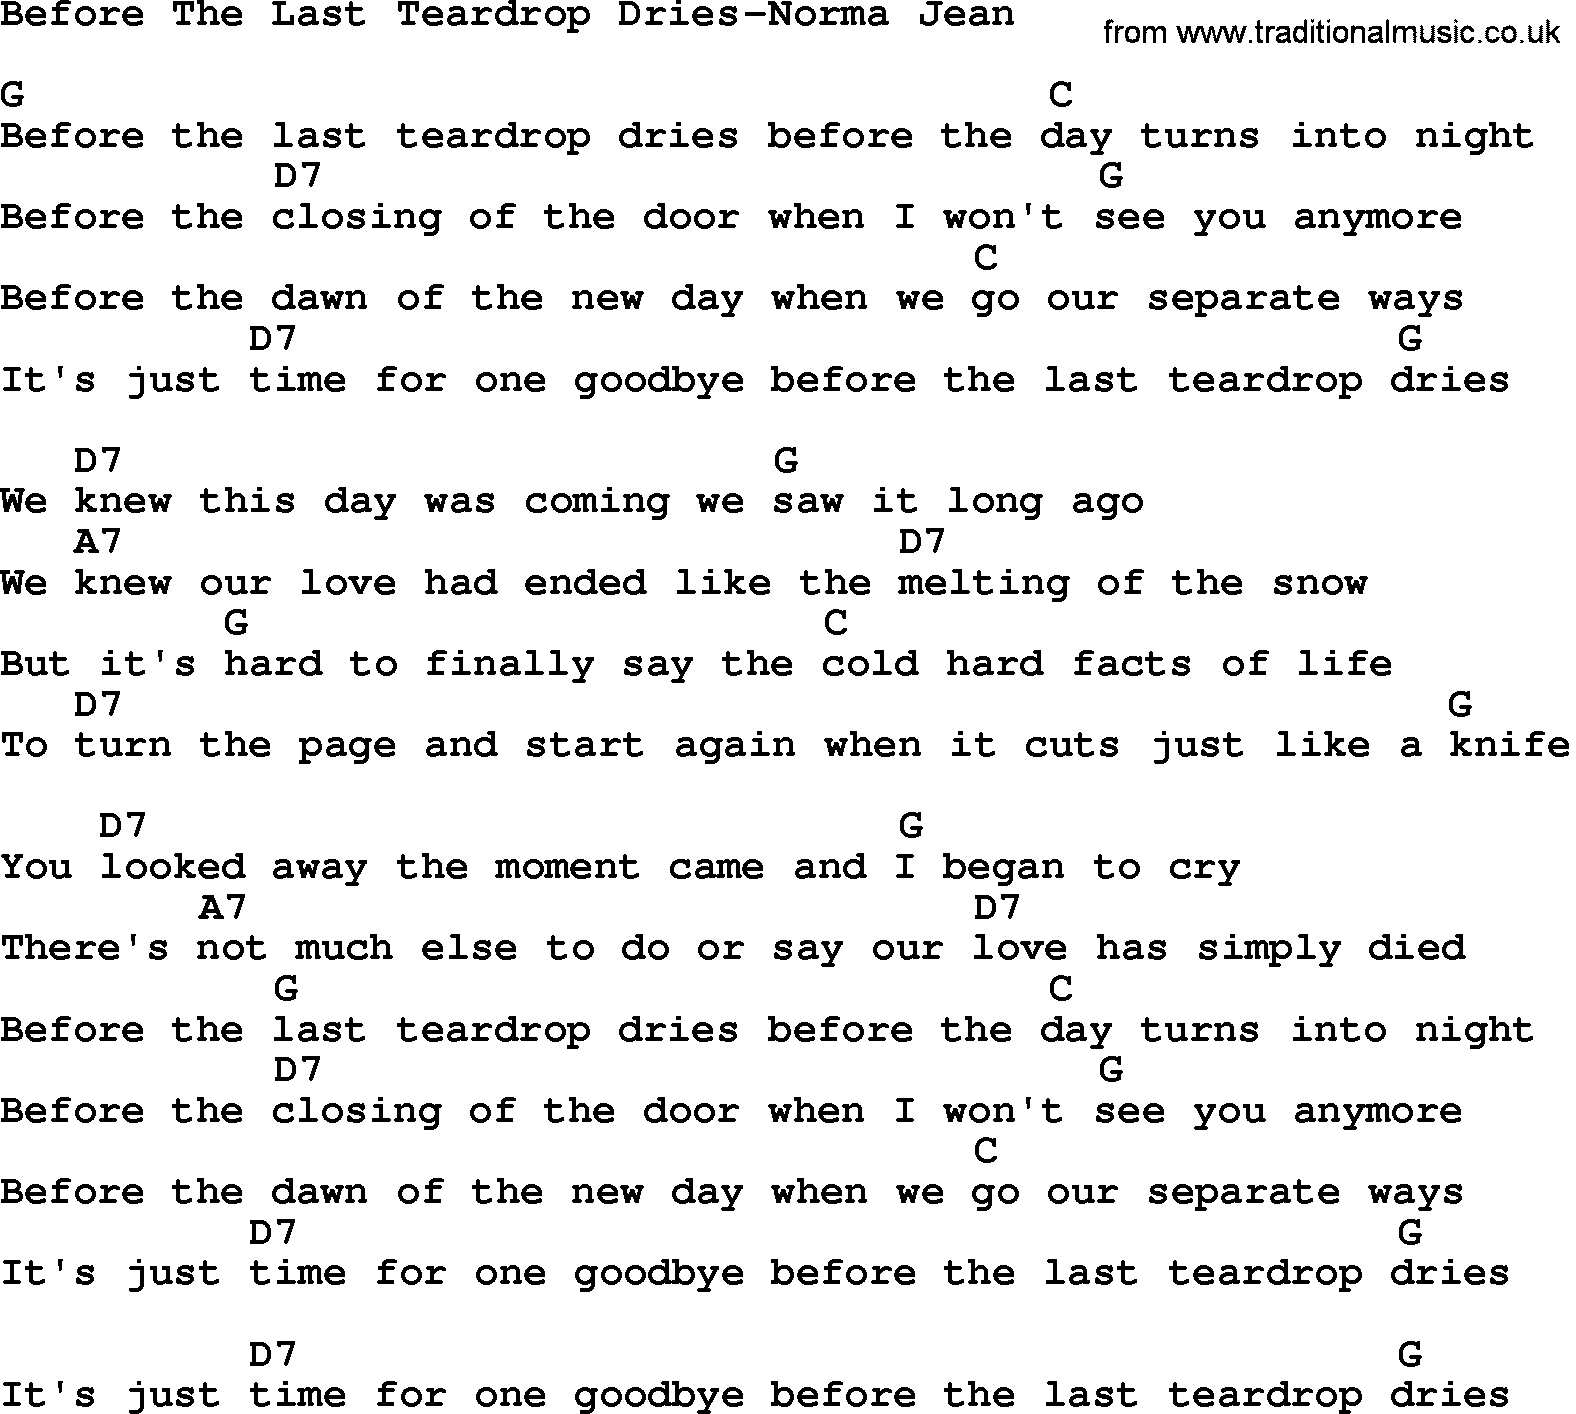 Country music song: Before The Last Teardrop Dries-Norma Jean lyrics and chords